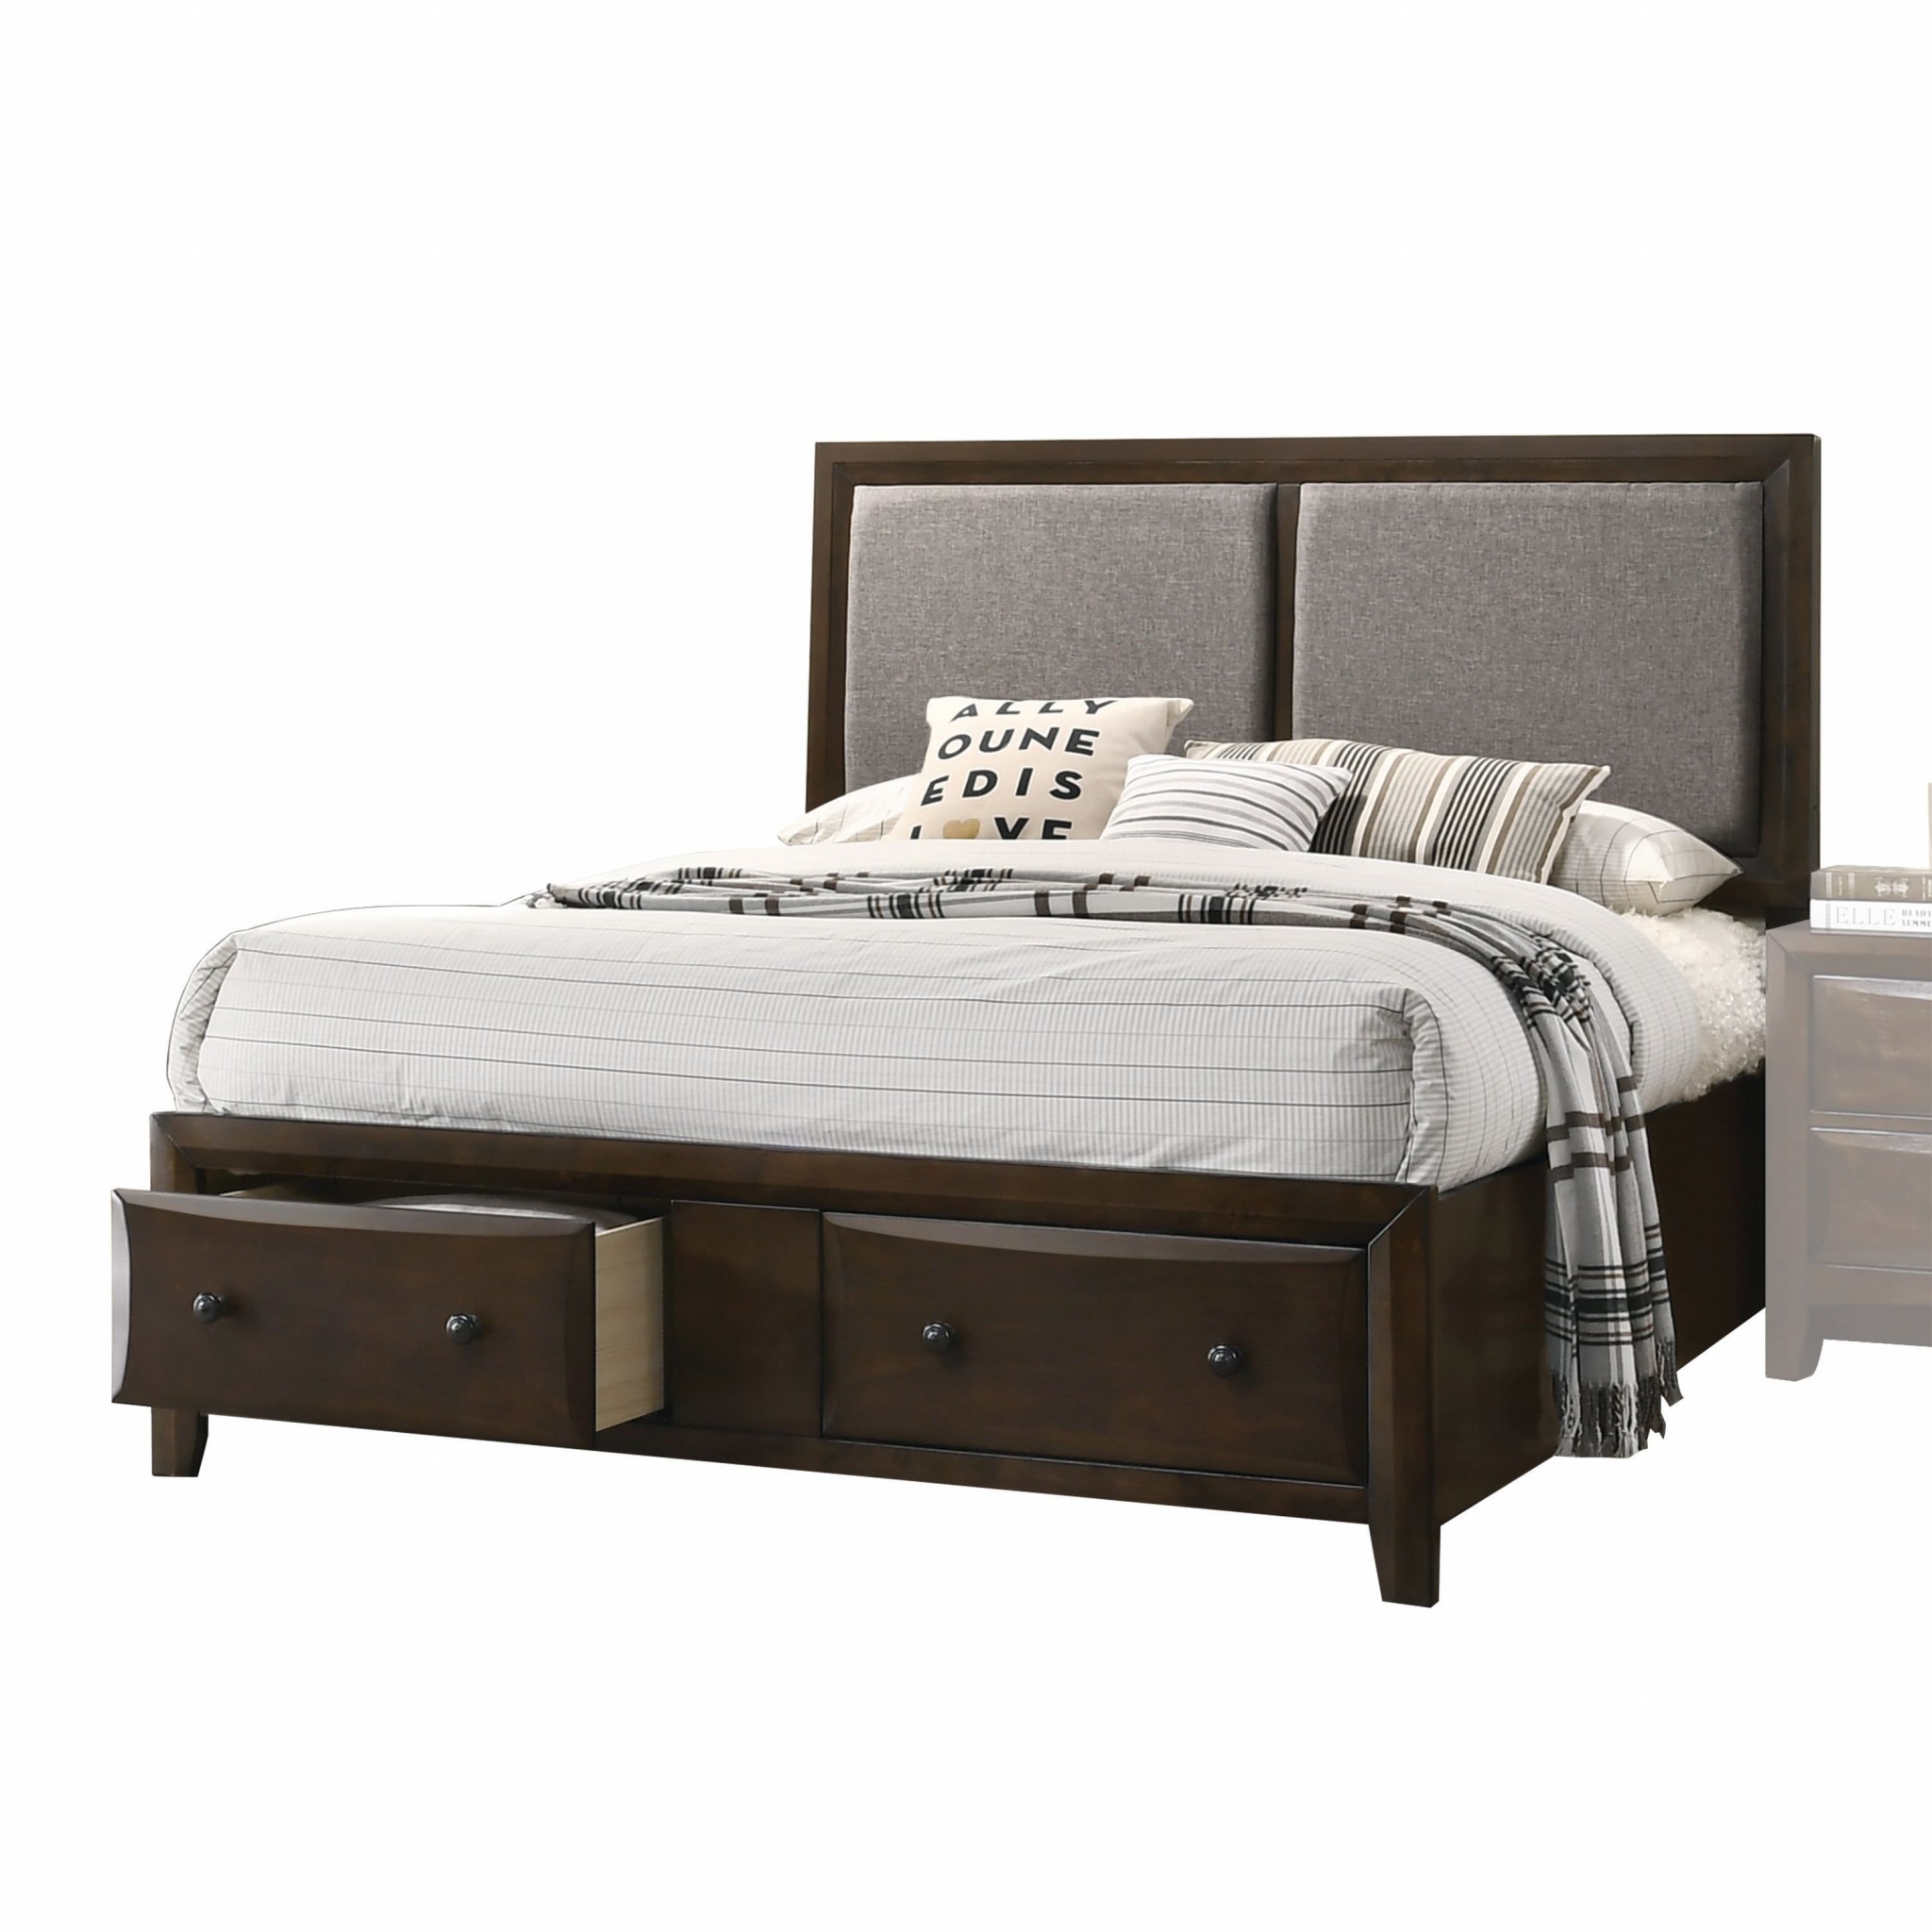 64" X 83" X 54" Fabric Walnut Wood Upholstered HB Queen Bed